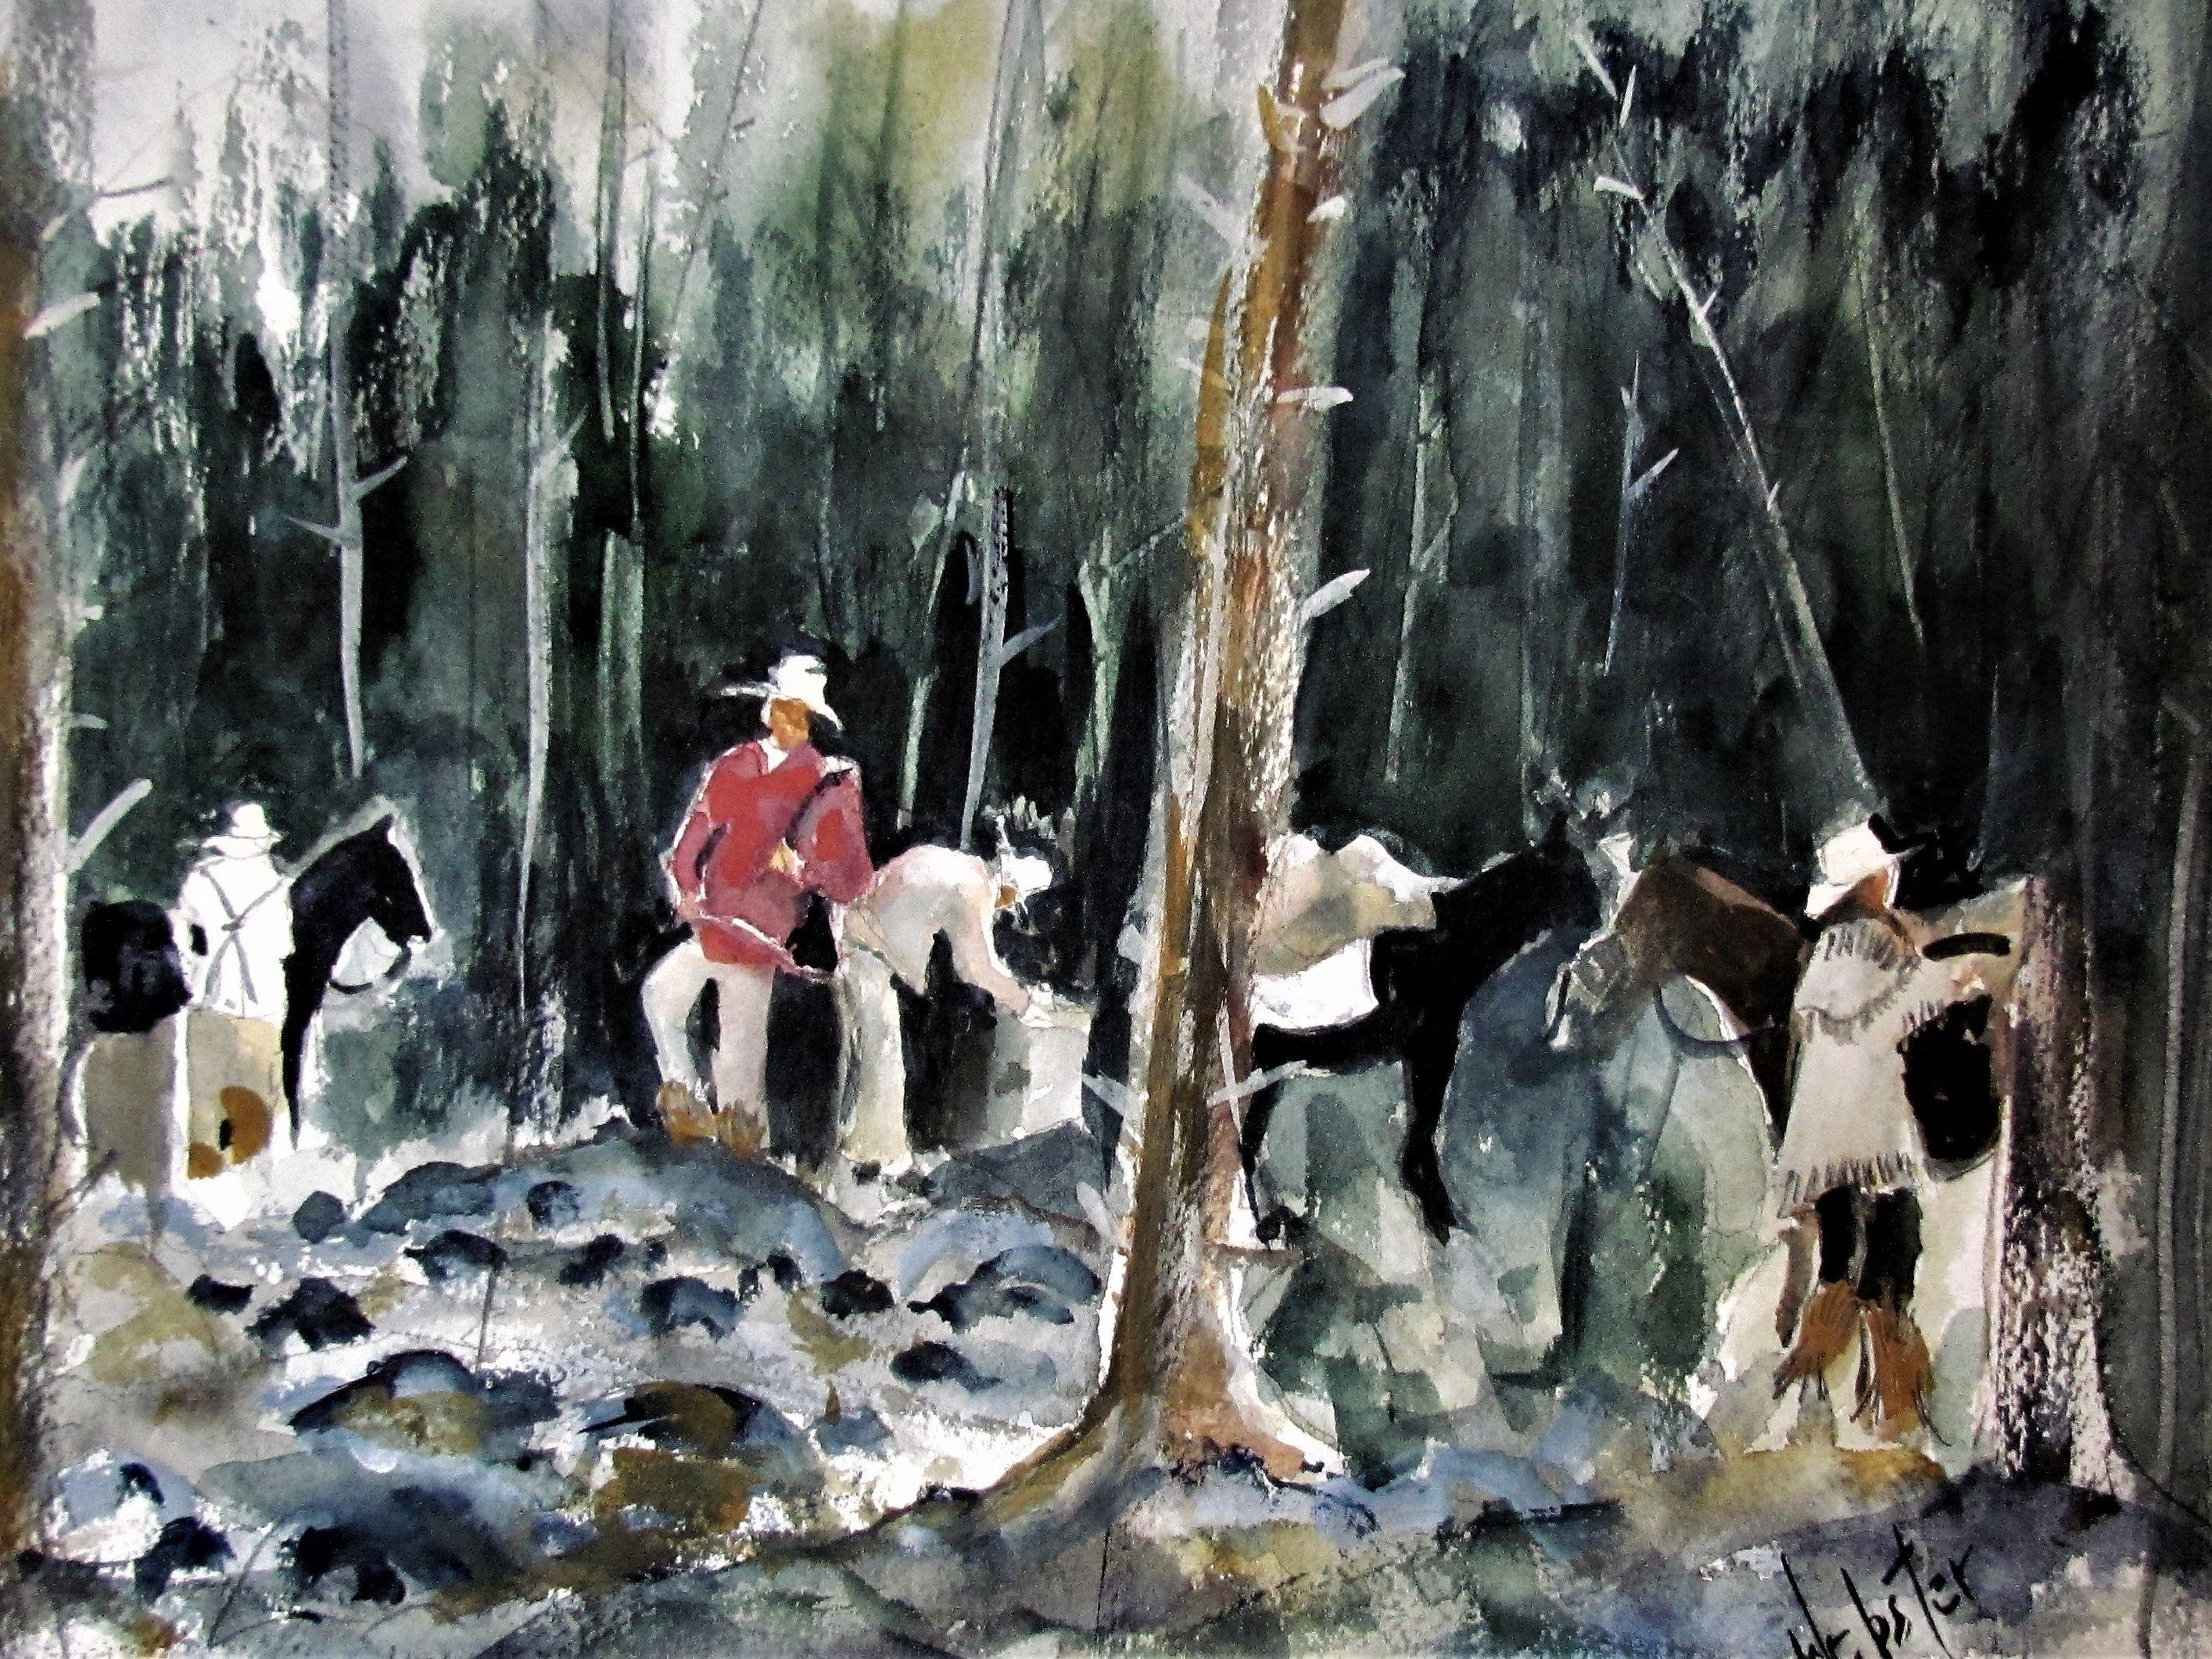 Breaking Camp, Painting, Watercolor on Paper - Art by William Webster